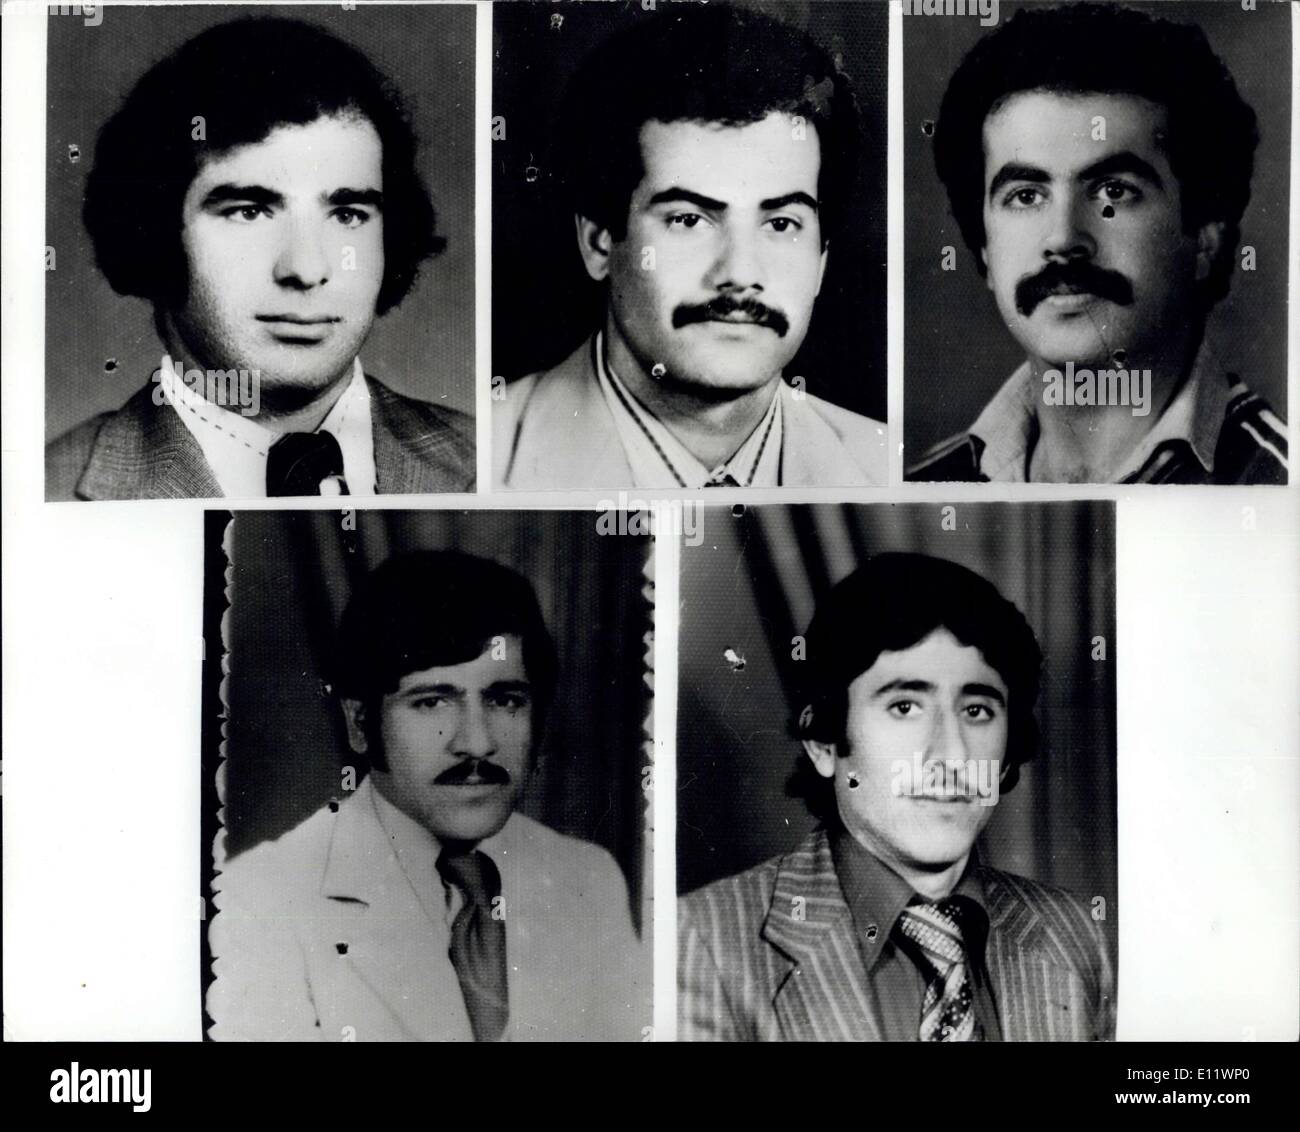 May 27, 1980 - Police Appeal For Siege Information: Scotland Yard are appealing for information about the five terrorists killed during the storming of the Iranian Embassy. Pictures of the dead terrorists have been issued with the names they are believed to have used. All five are believed to be of Iranian nationality. Photo Shows: The five dead terrorists, clockwise from top left: Themir Mohahmed Husein, Shakir Abdullah Radhil, Awn Ali Mohammad, Shakir Sultan Said, Makki Hanoun Ali. Stock Photo